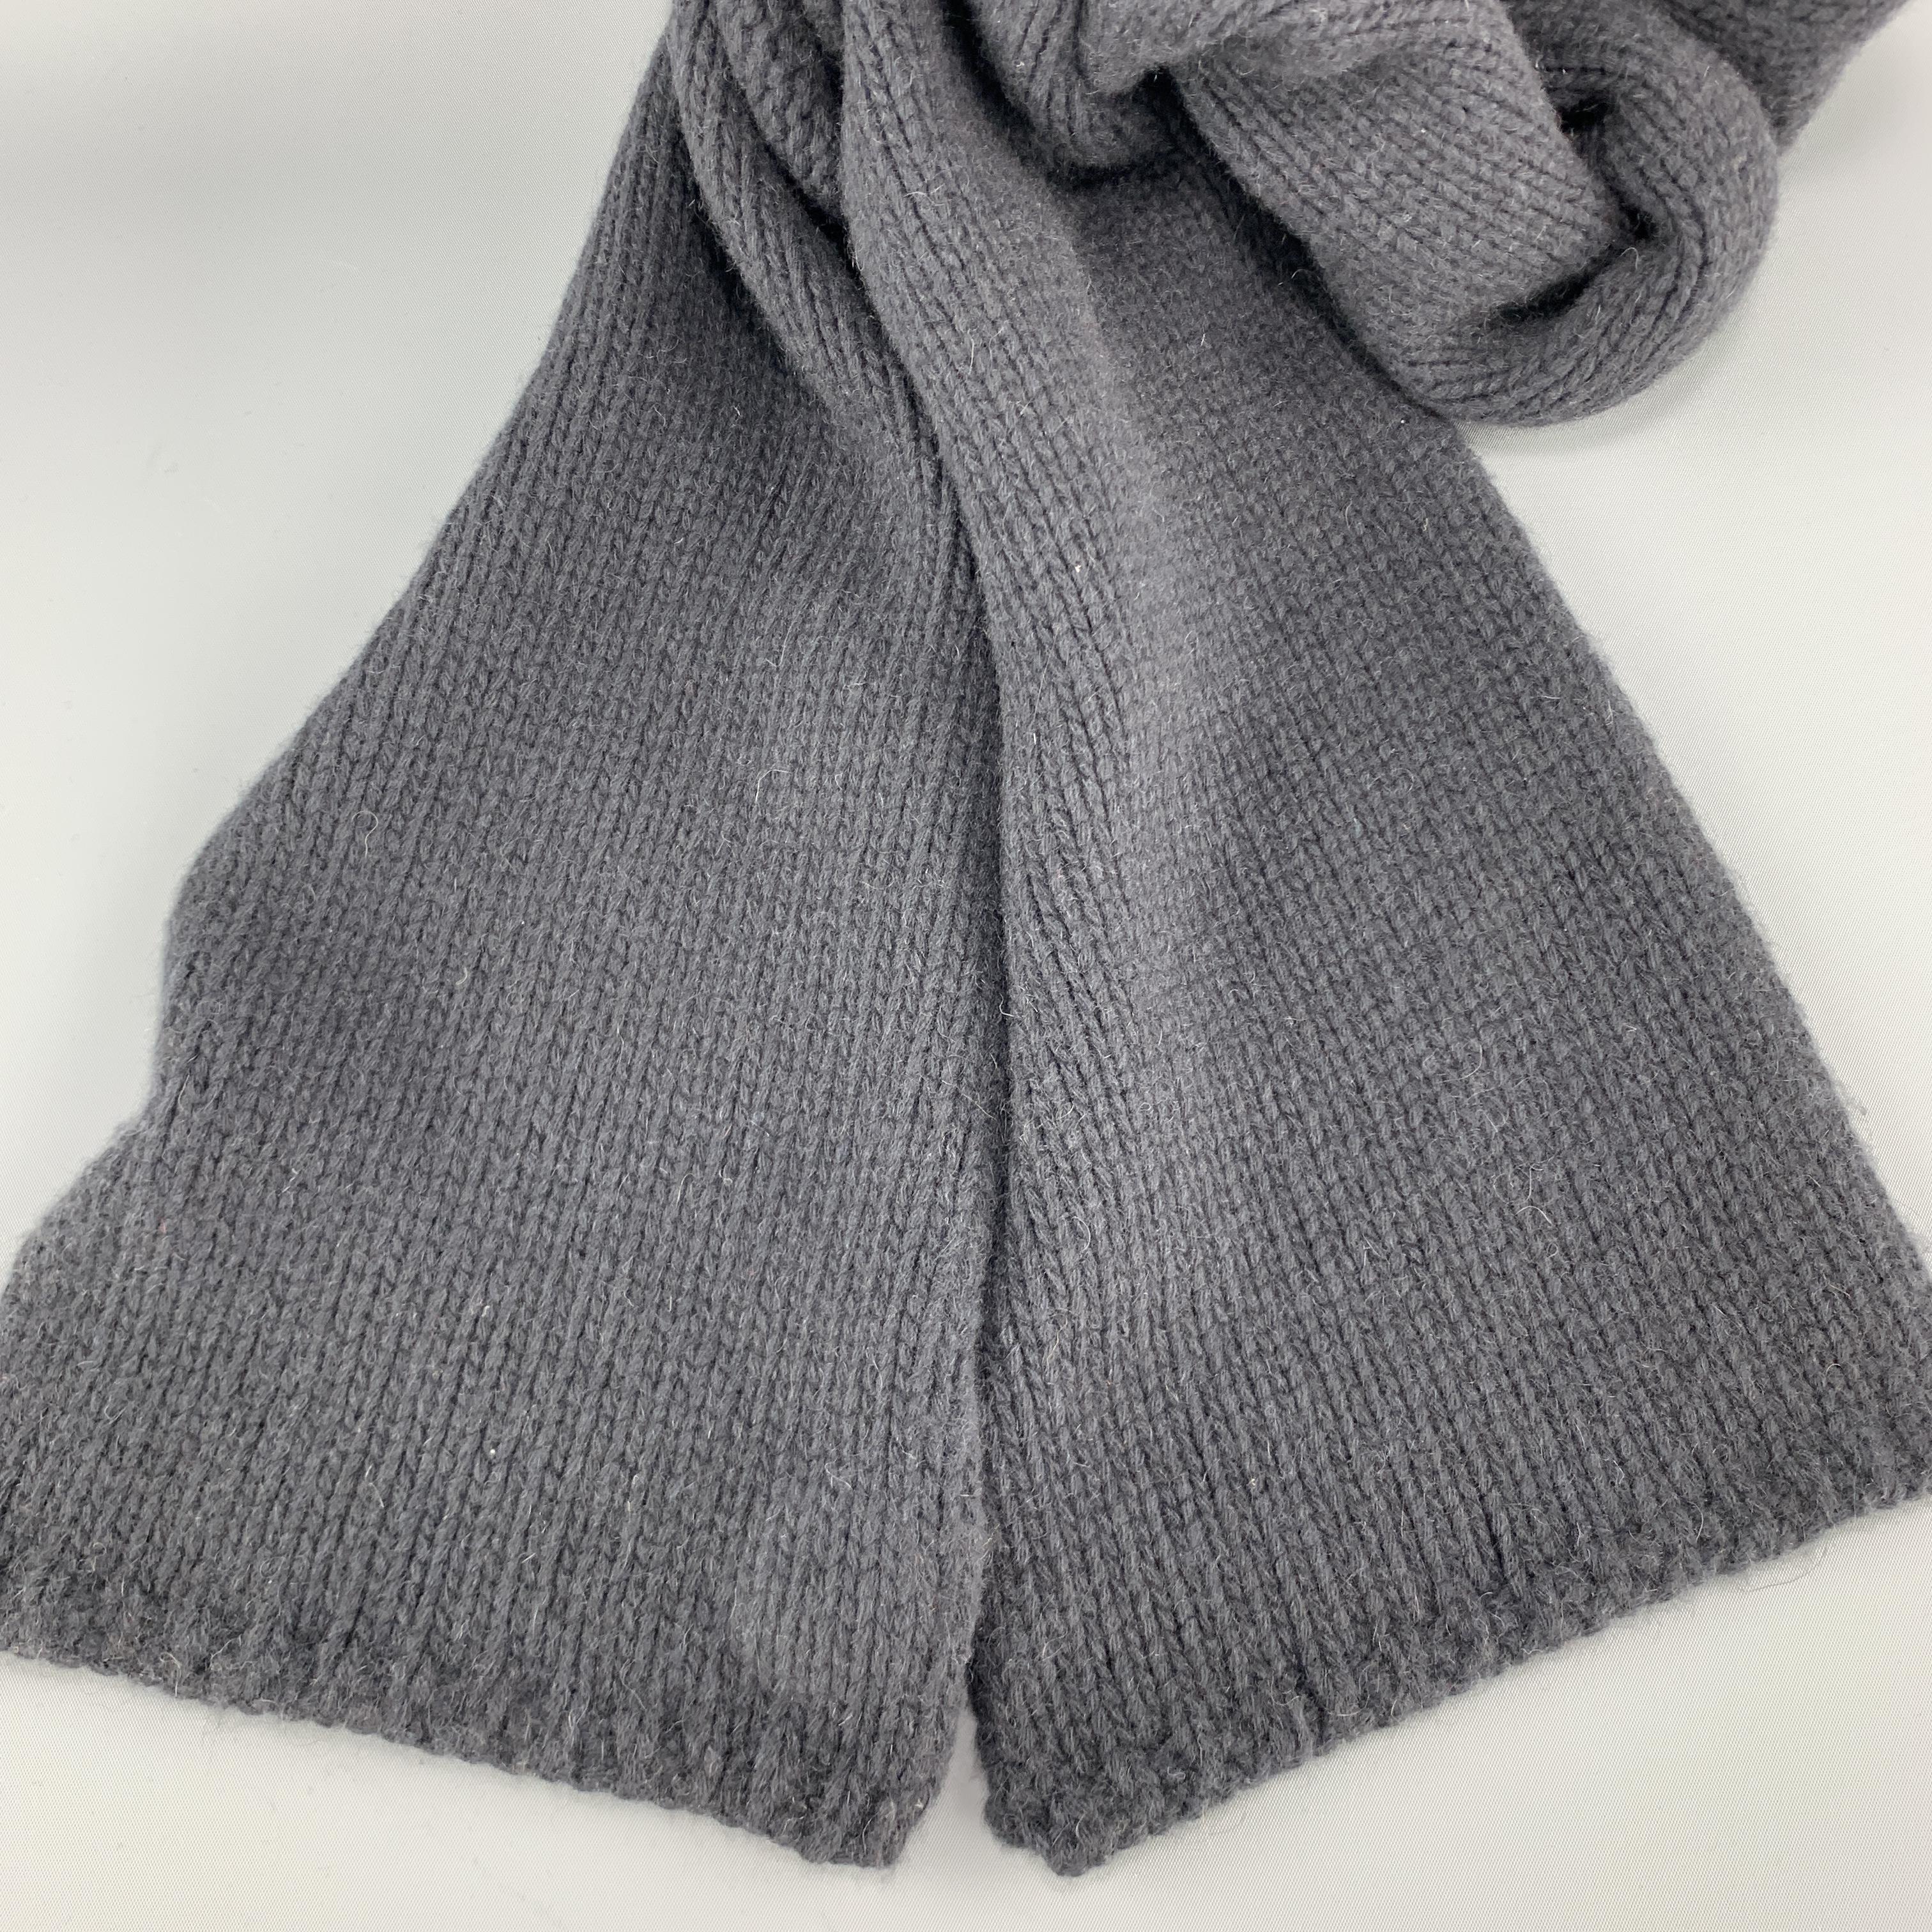 MARC JACOBS scarf comes in navy cashmere knit in a long rolled shapes.

Good Pre-Owned Condition.

90 x 8.5 in.